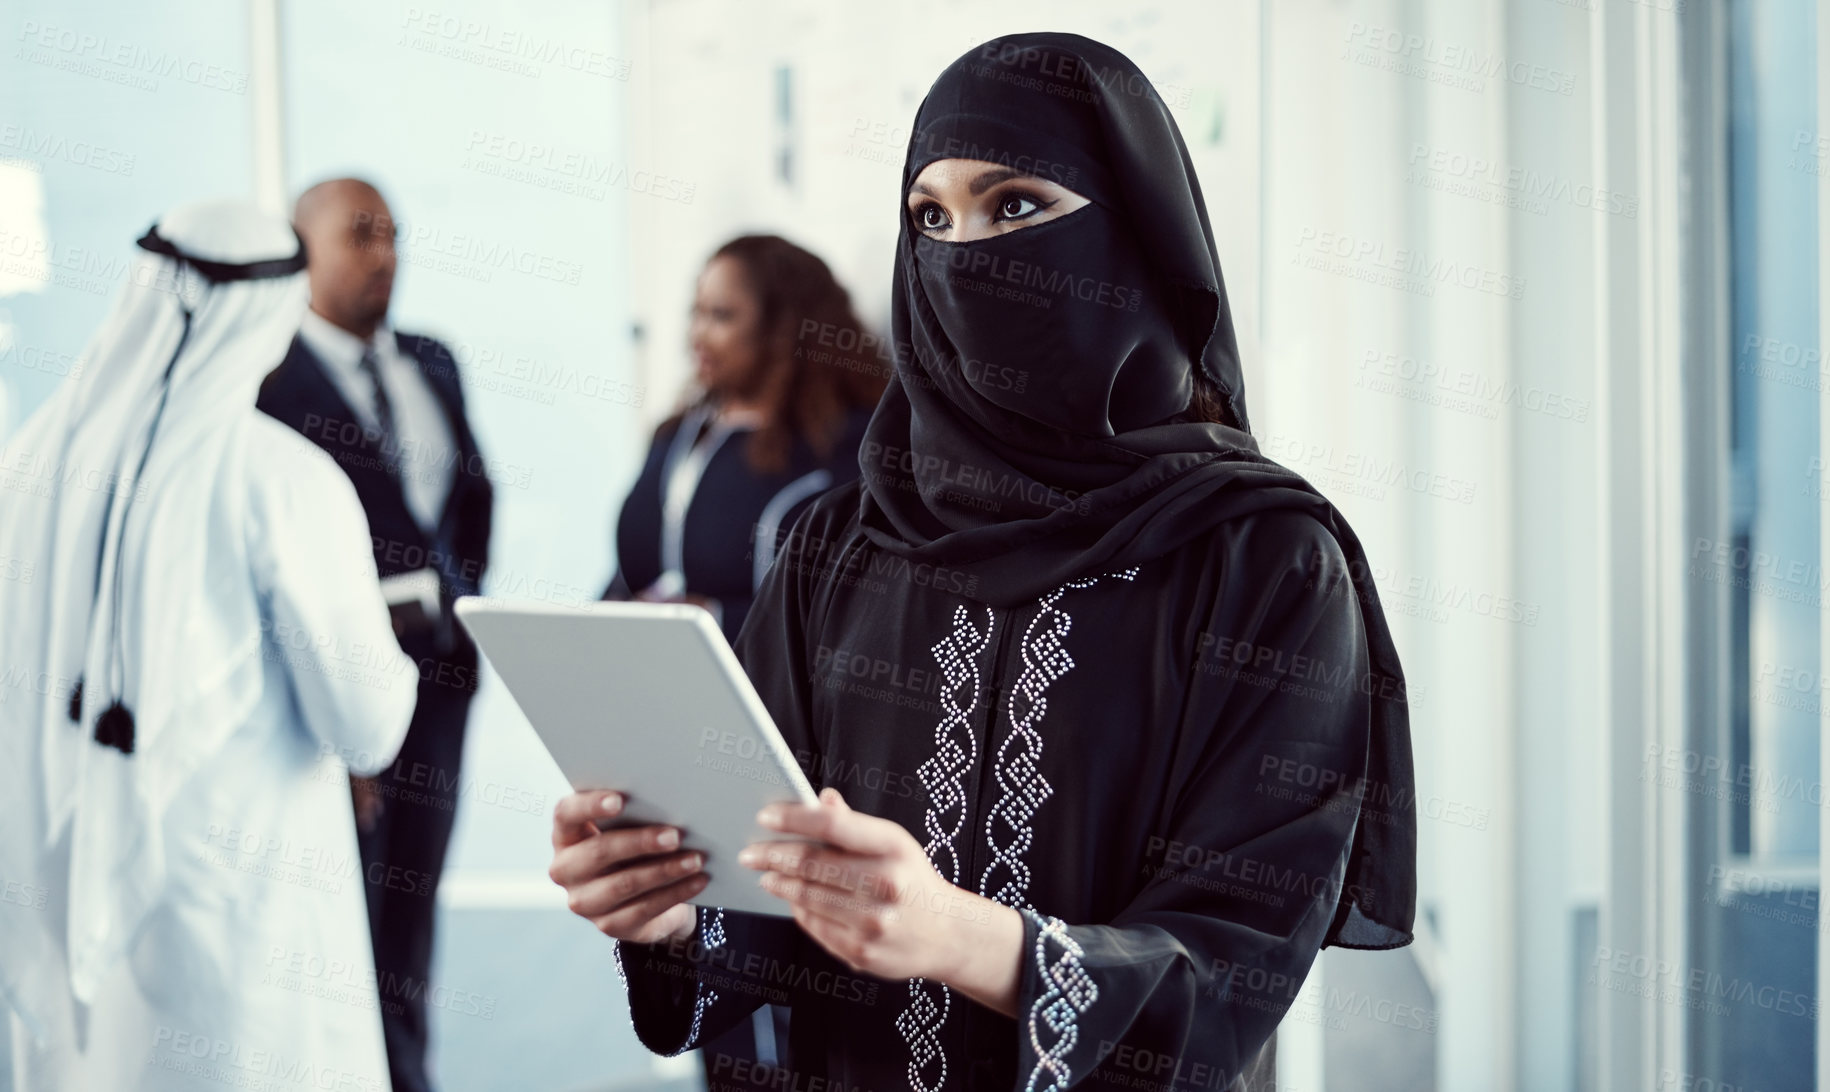 Buy stock photo Cropped shot of an attractive young arabic businesswoman working on a tablet in the office with her colleagues in the background